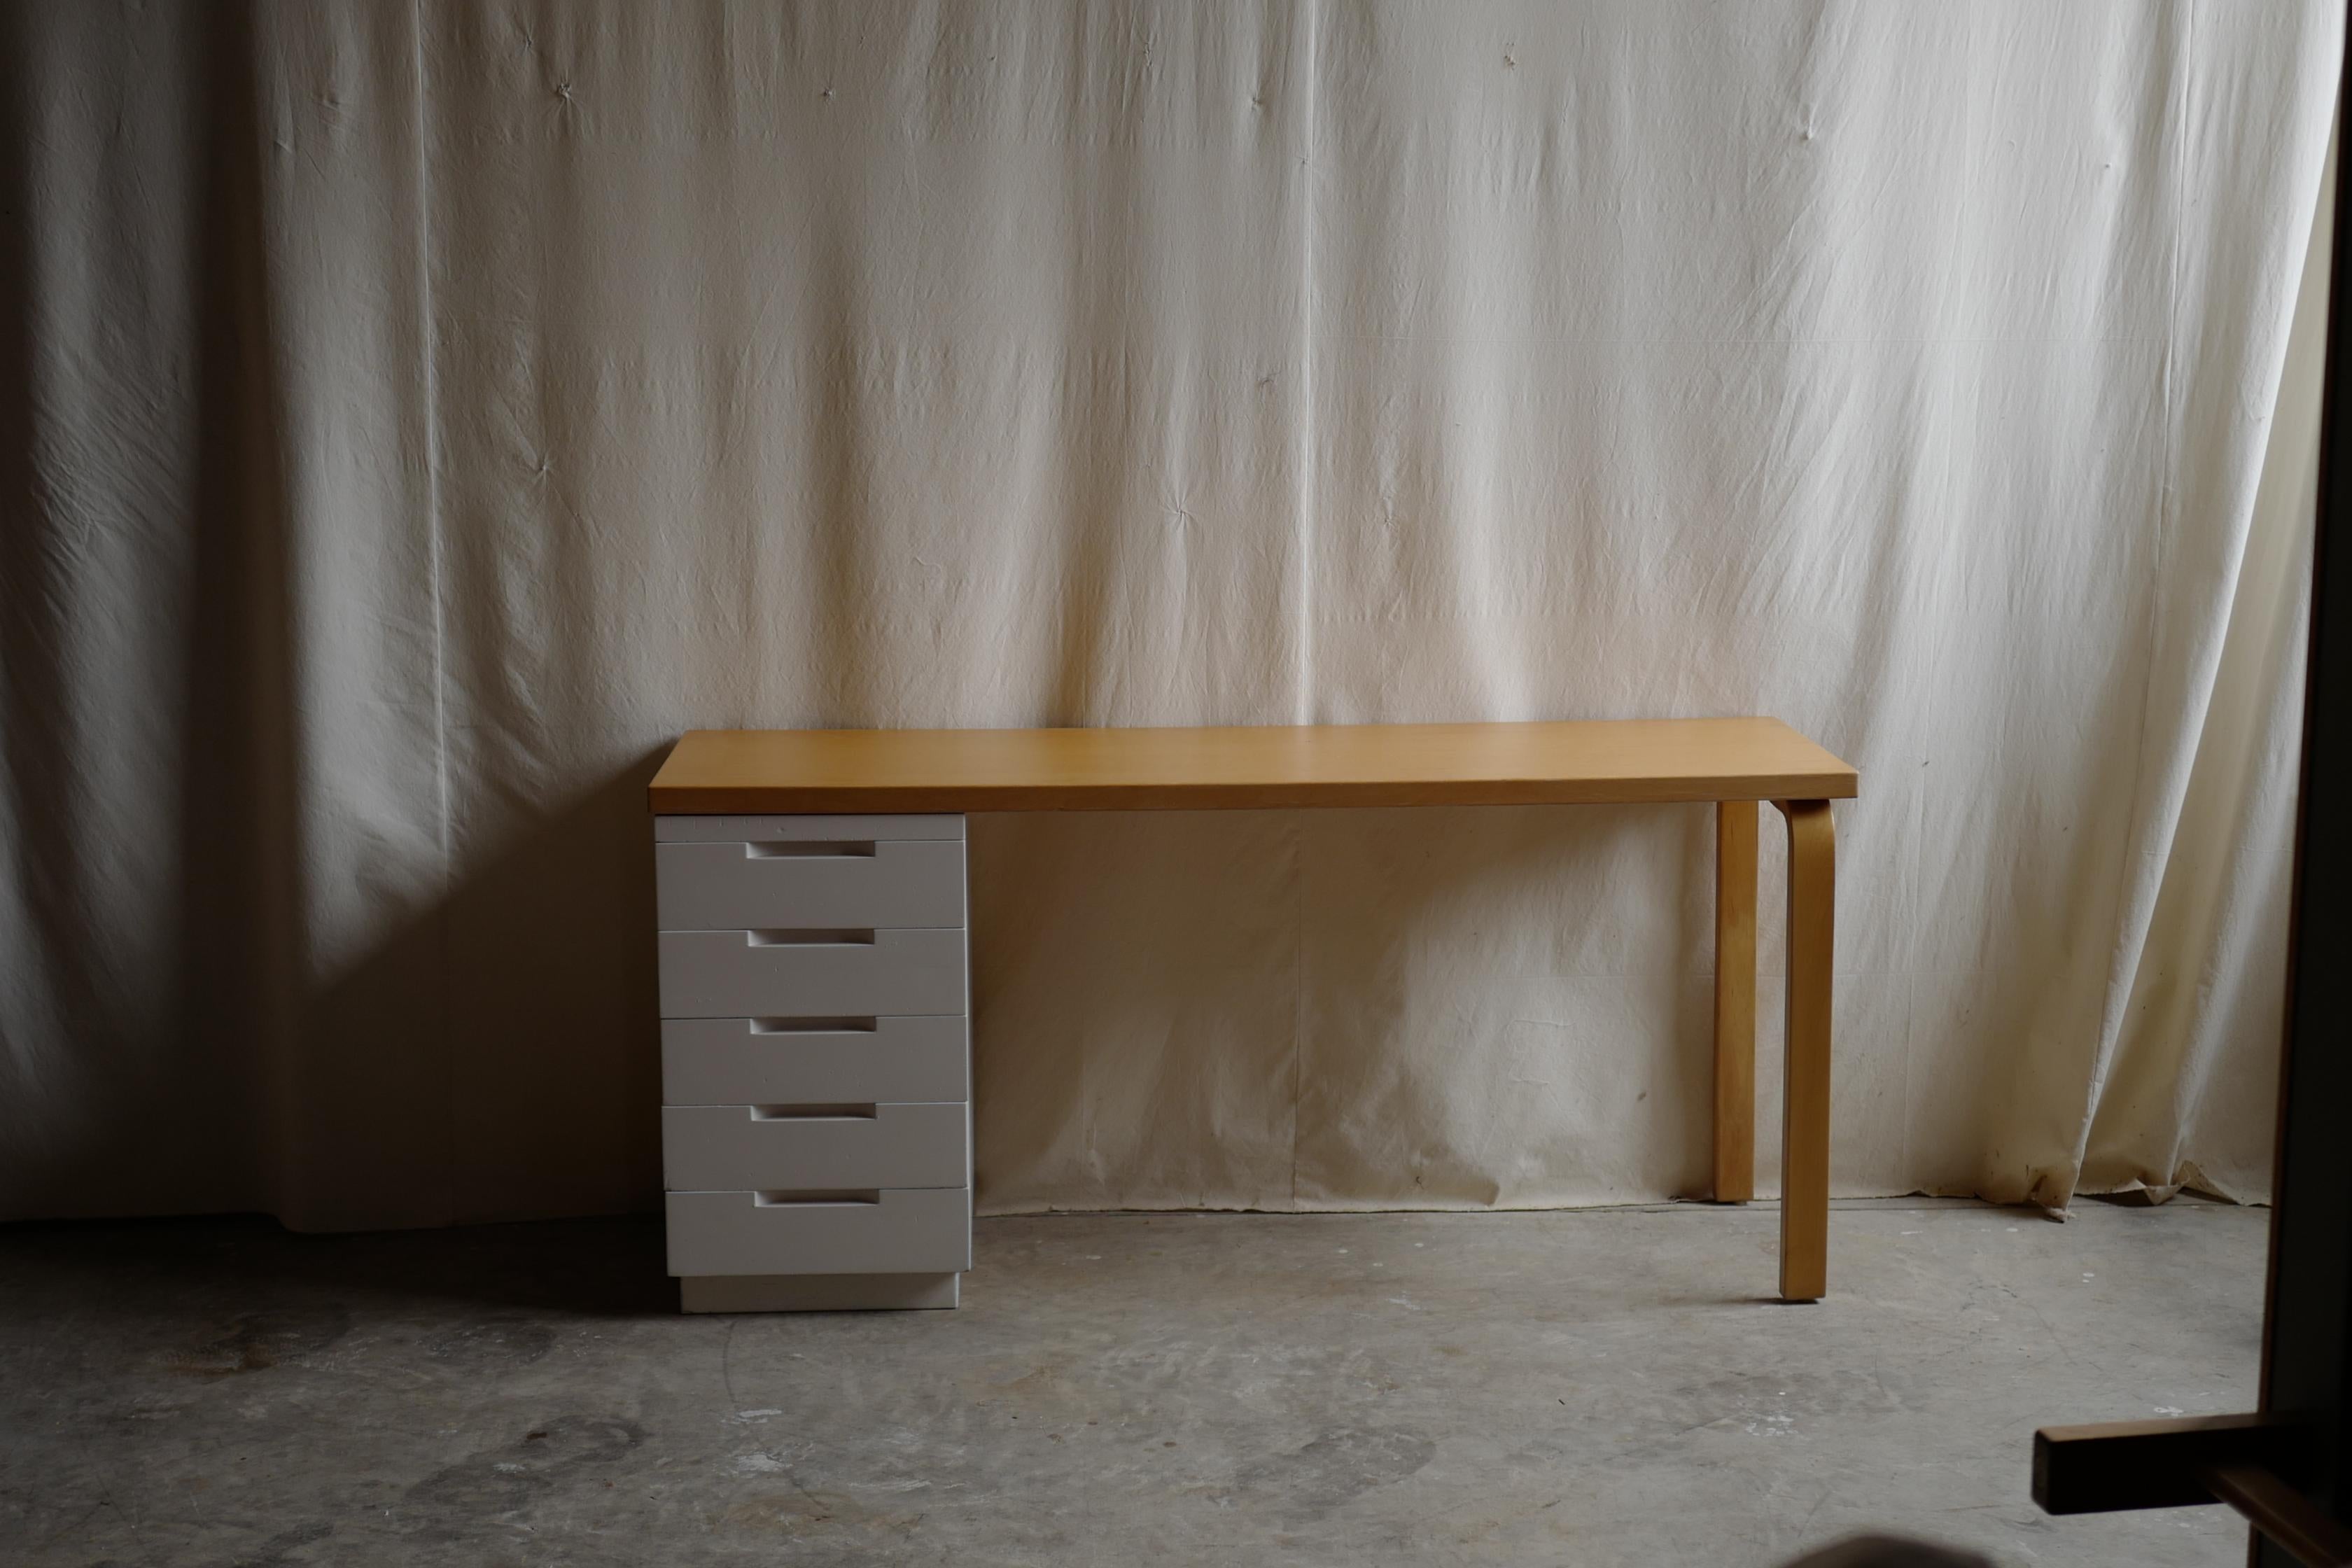 Alvar aalto design beachtop desk and drawer set in white paint.

You can expect yellowing to amber in the future, and it has a beautiful aging feeling.
 